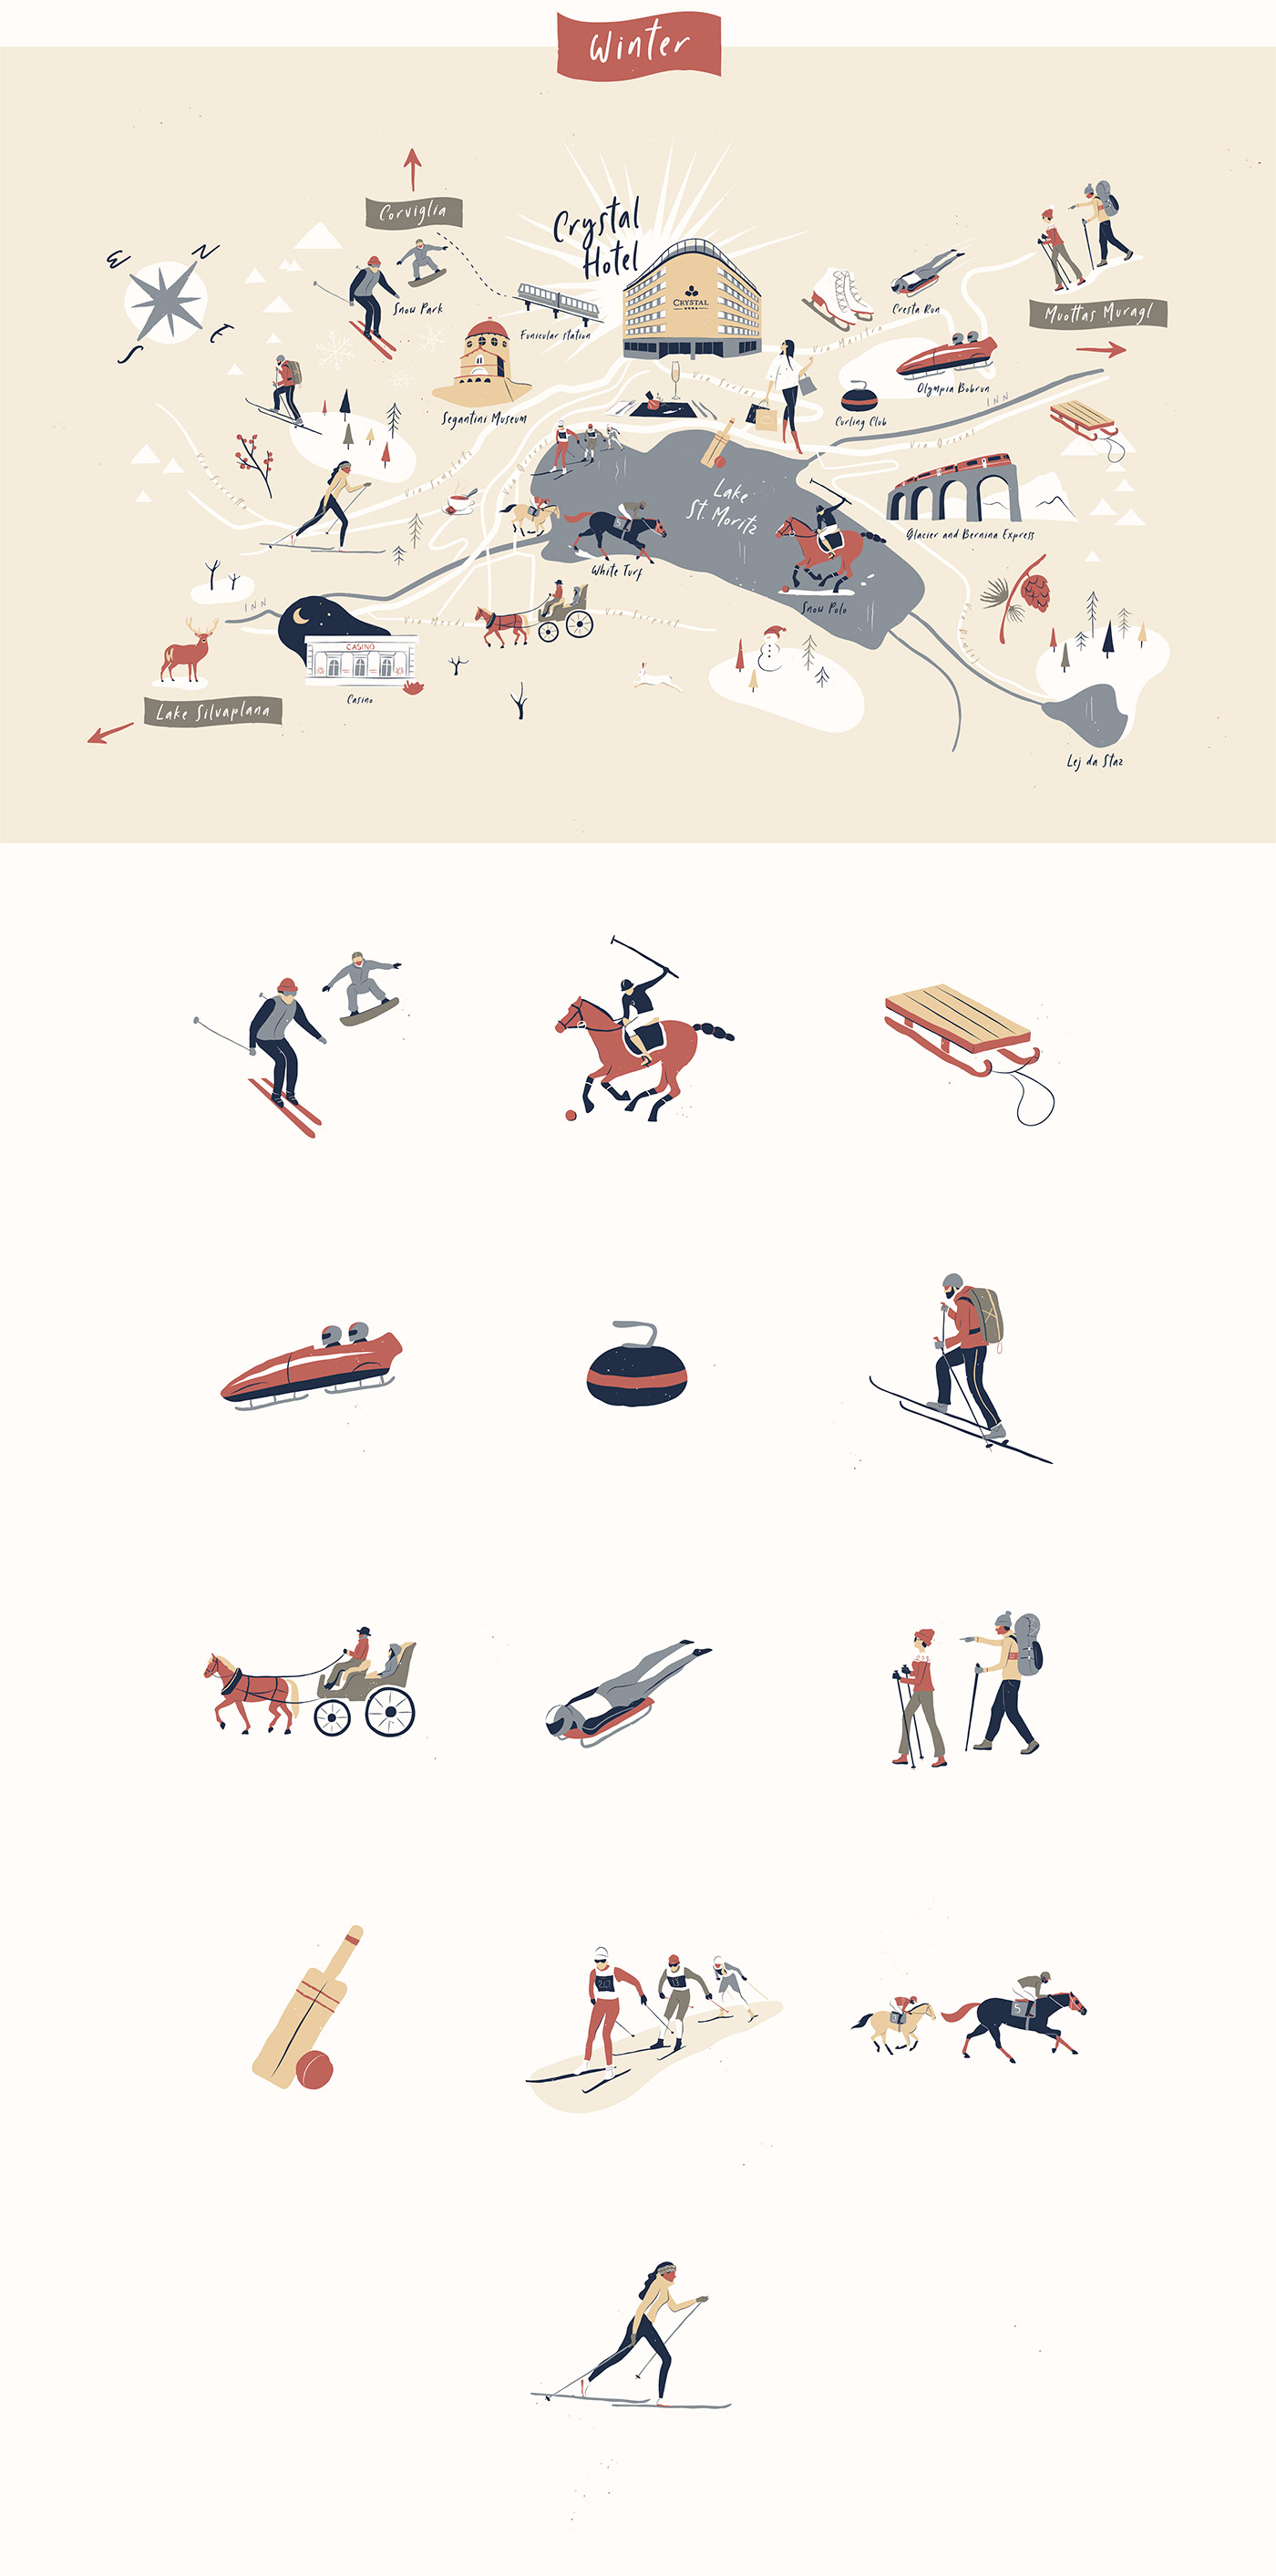 Illustrated map of most interesting activities to be enjoyed during wintertime in St. Moritz